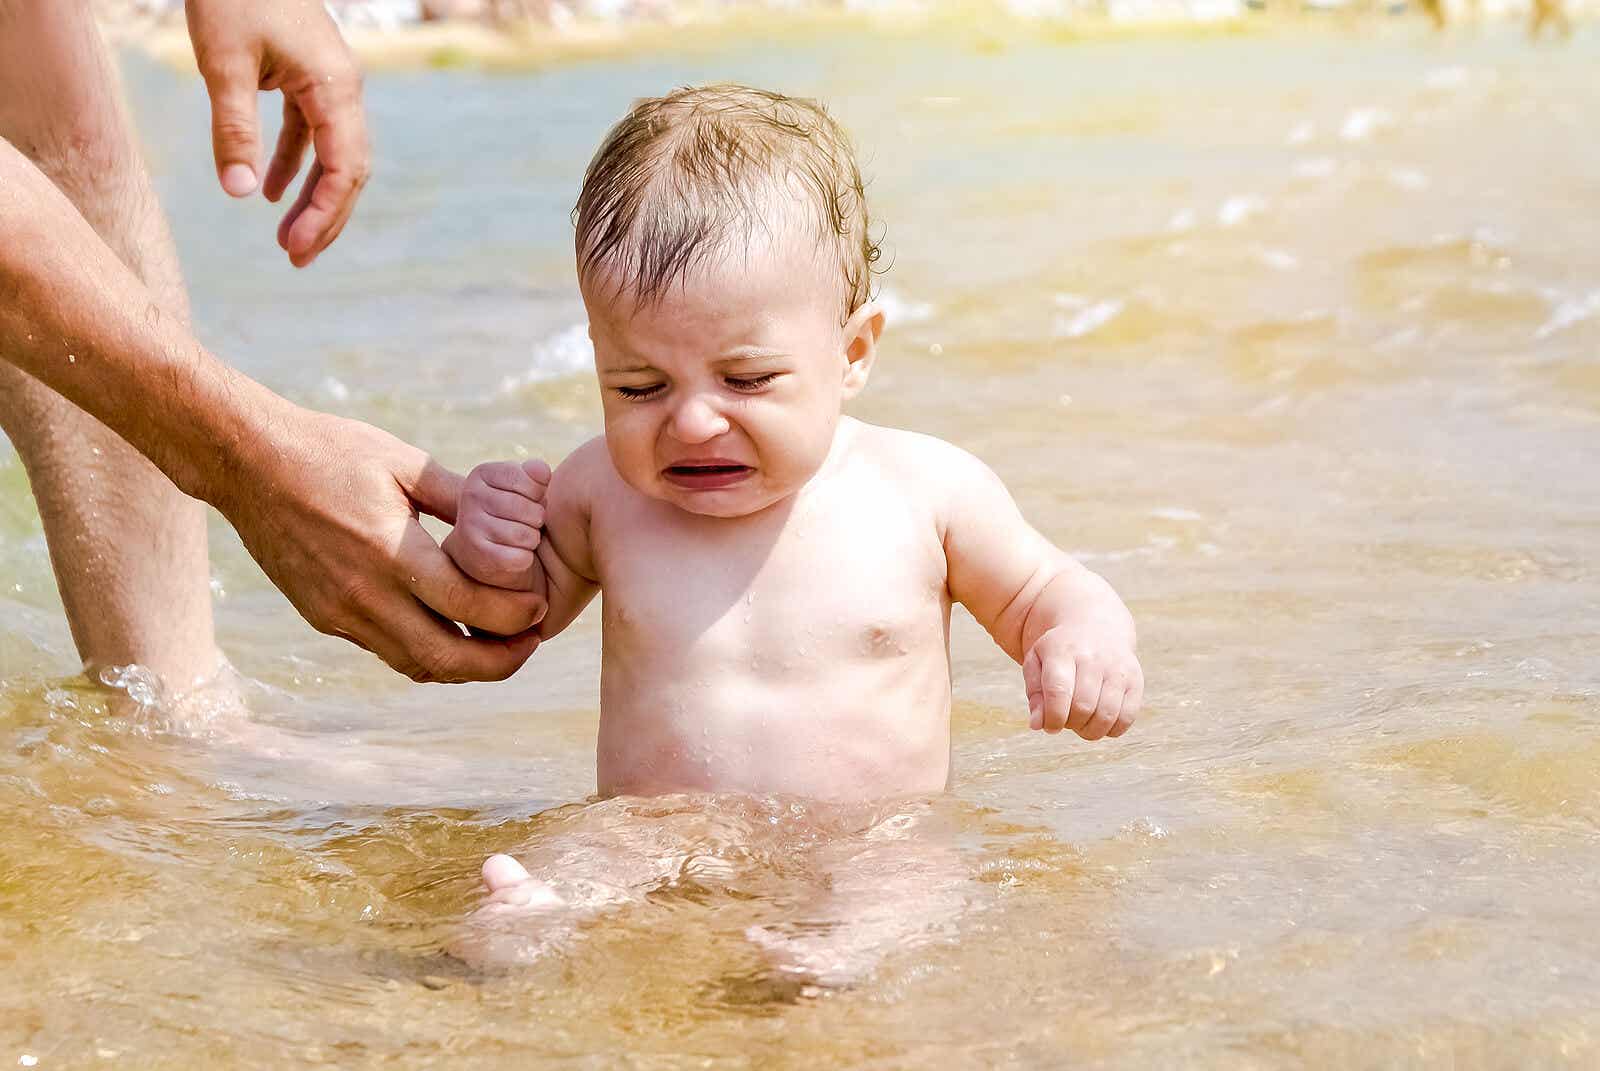 A baby crying in the water.